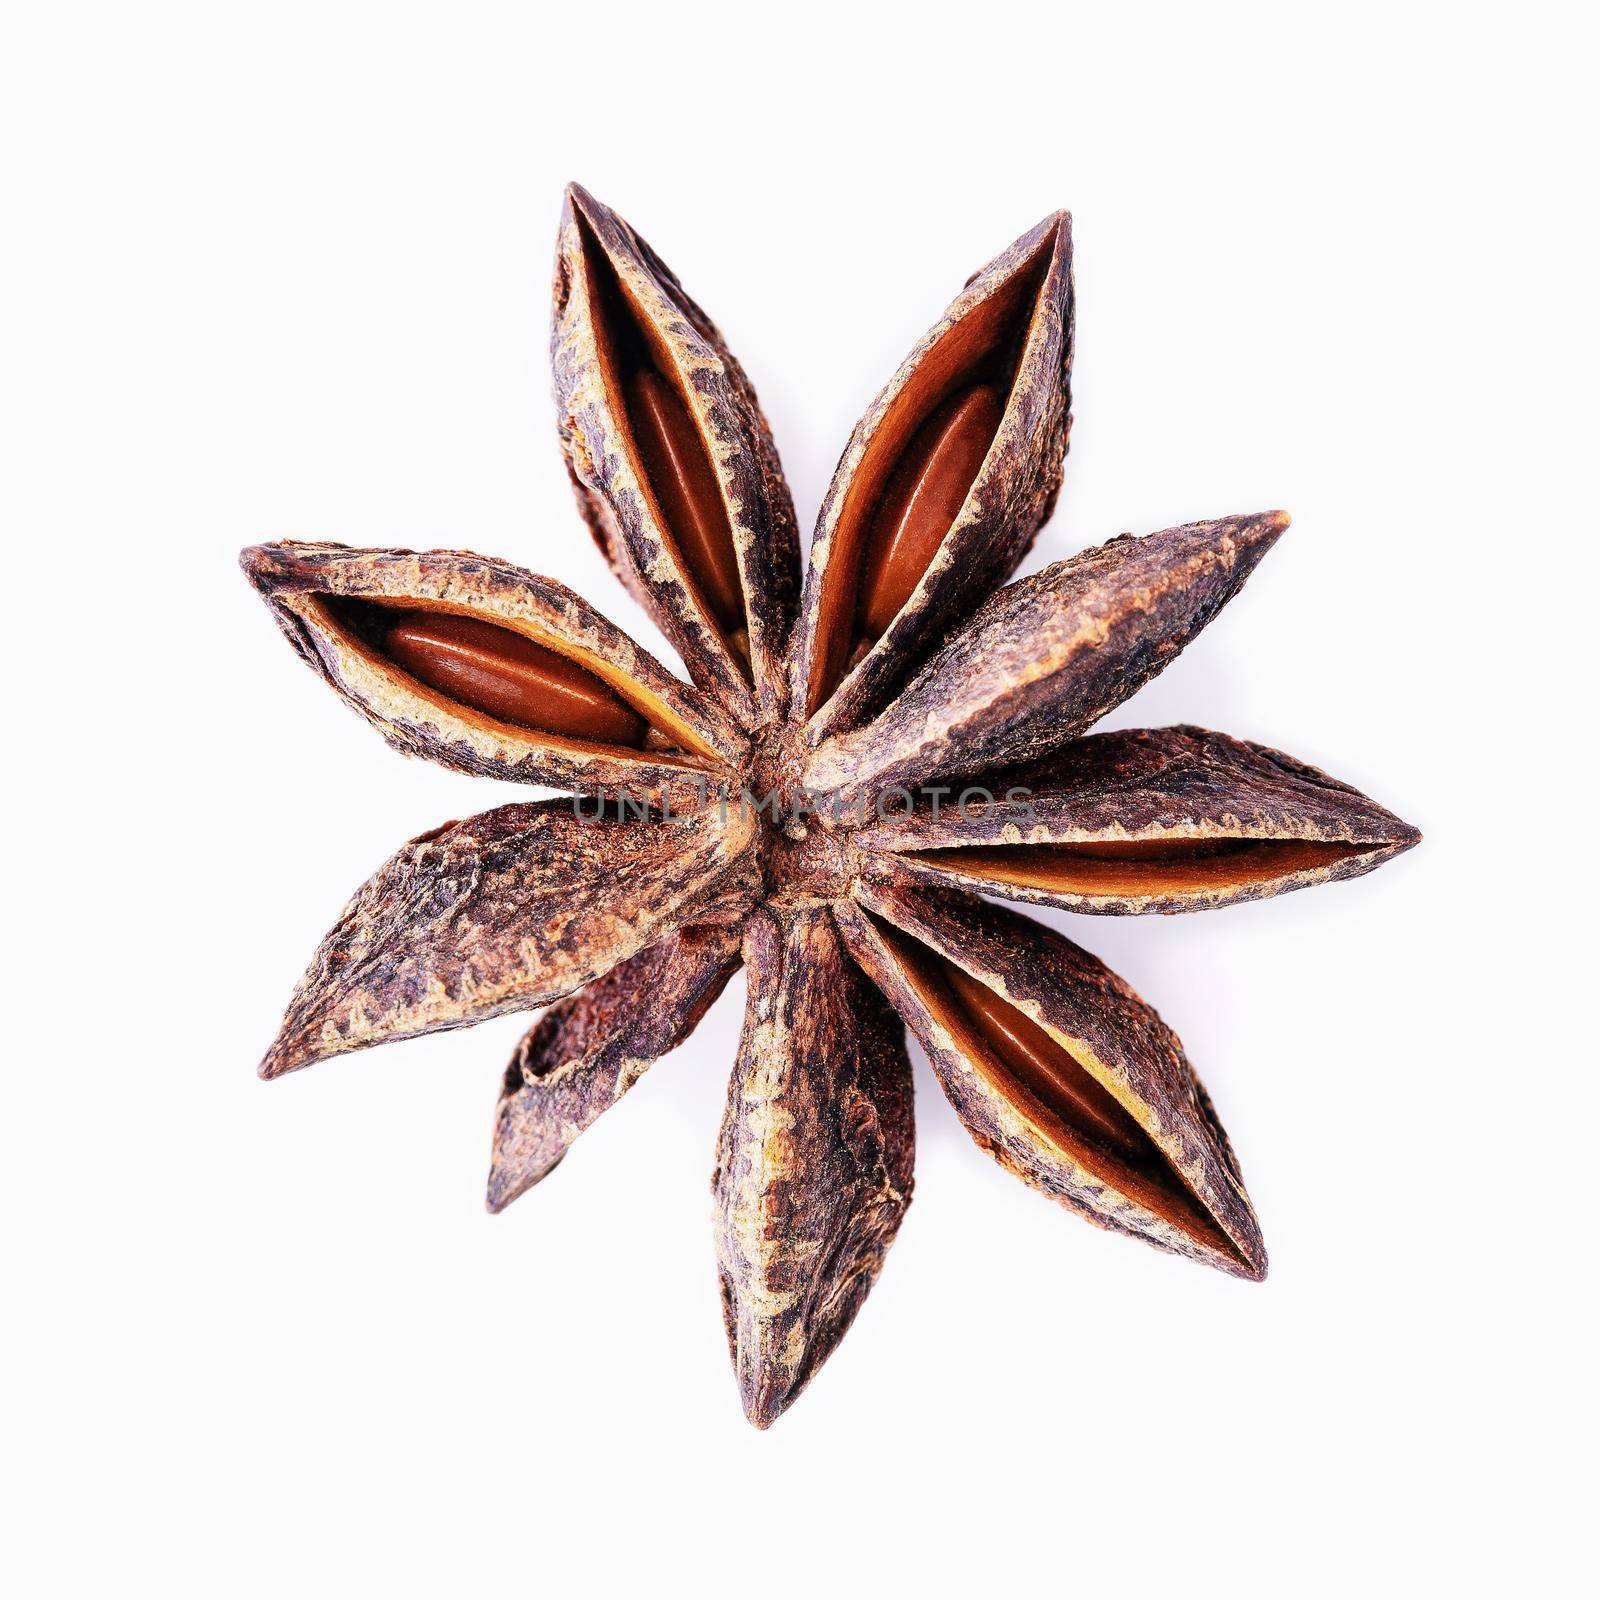 Single Chinese star anise isolated on white background. by kerdkanno